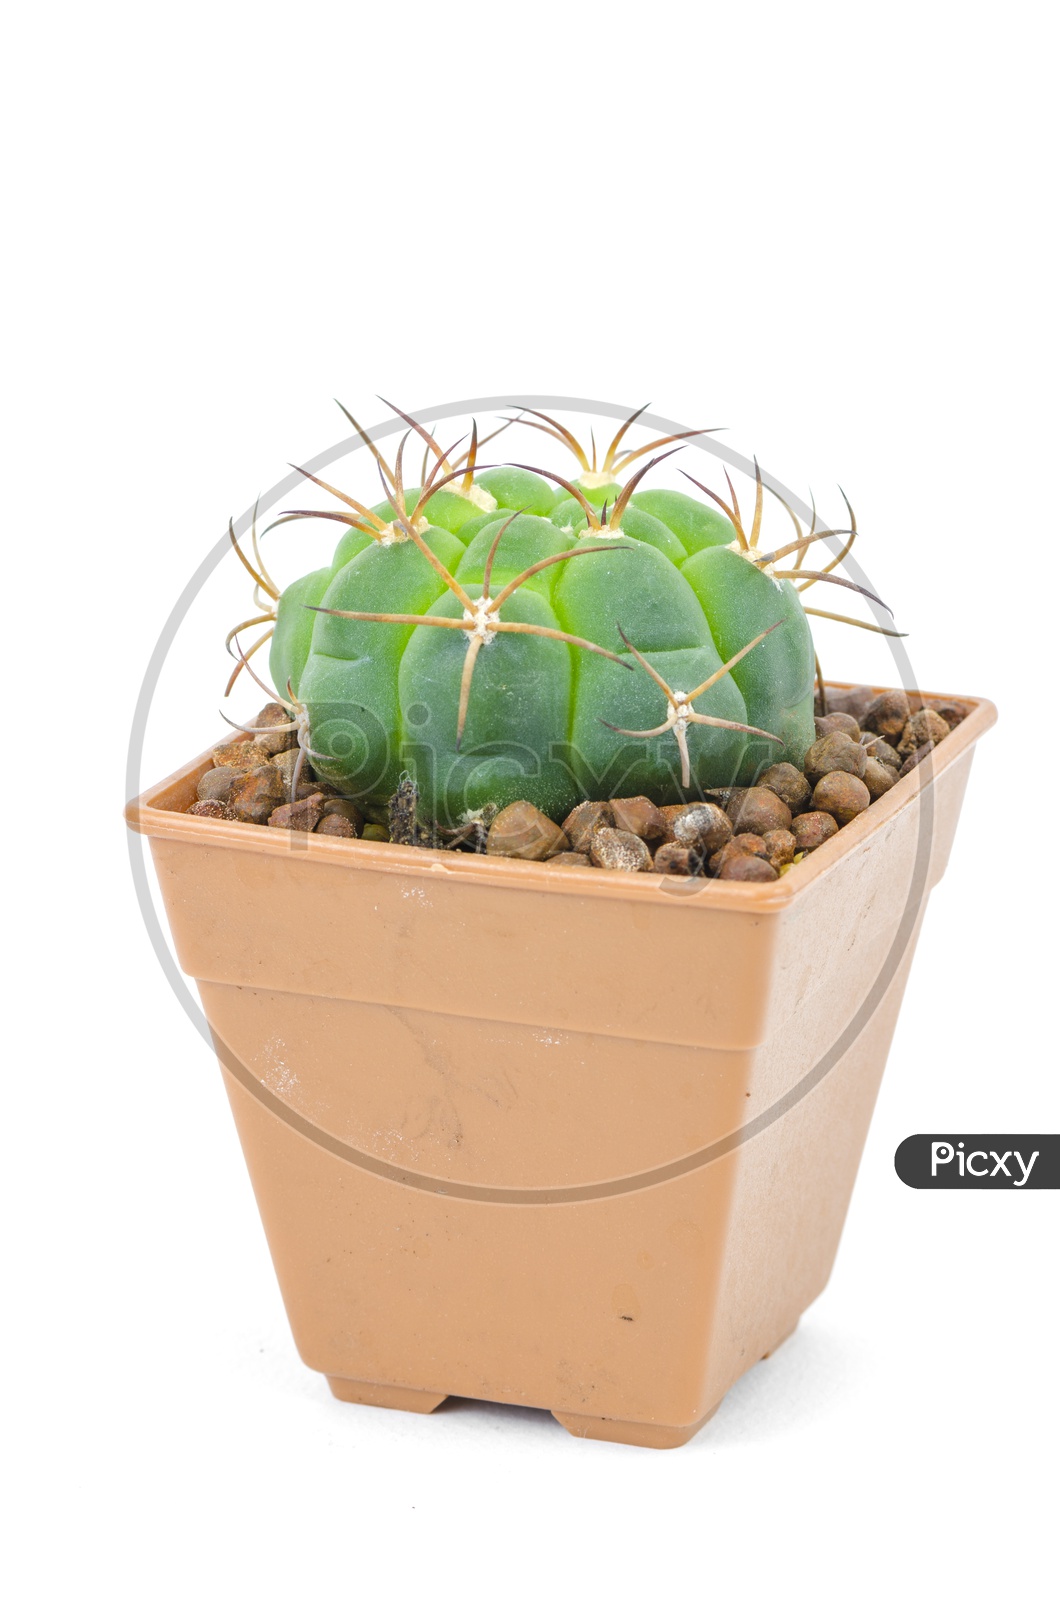 green cactus Plant In a Pot Over an Isolated White Background